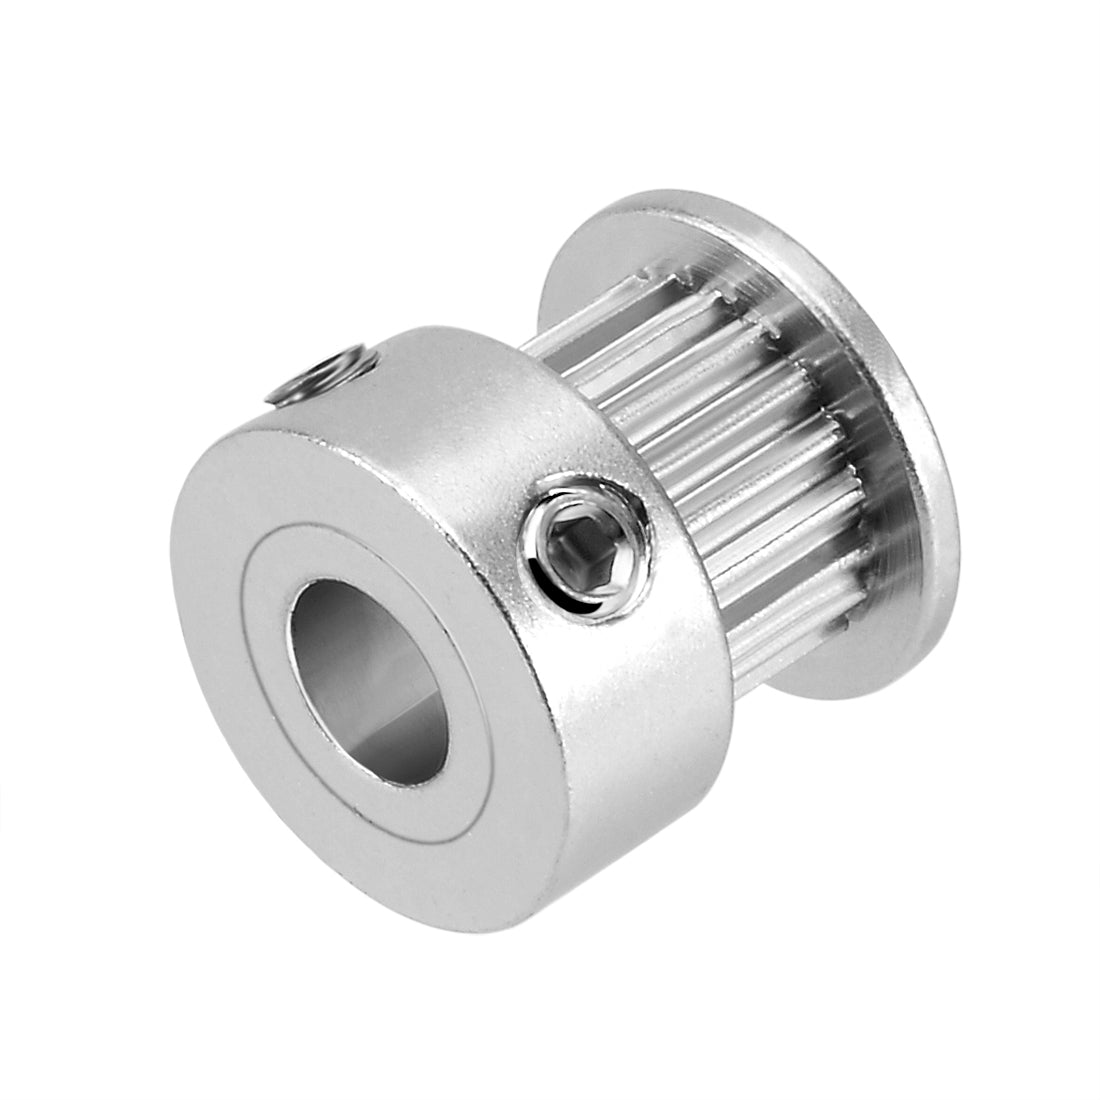 uxcell Uxcell 3D Printer Aluminum Timing Pulley Flange Wheel 20 Teeth 6.35mm Bore 2mm Pitch for 6mm Belt